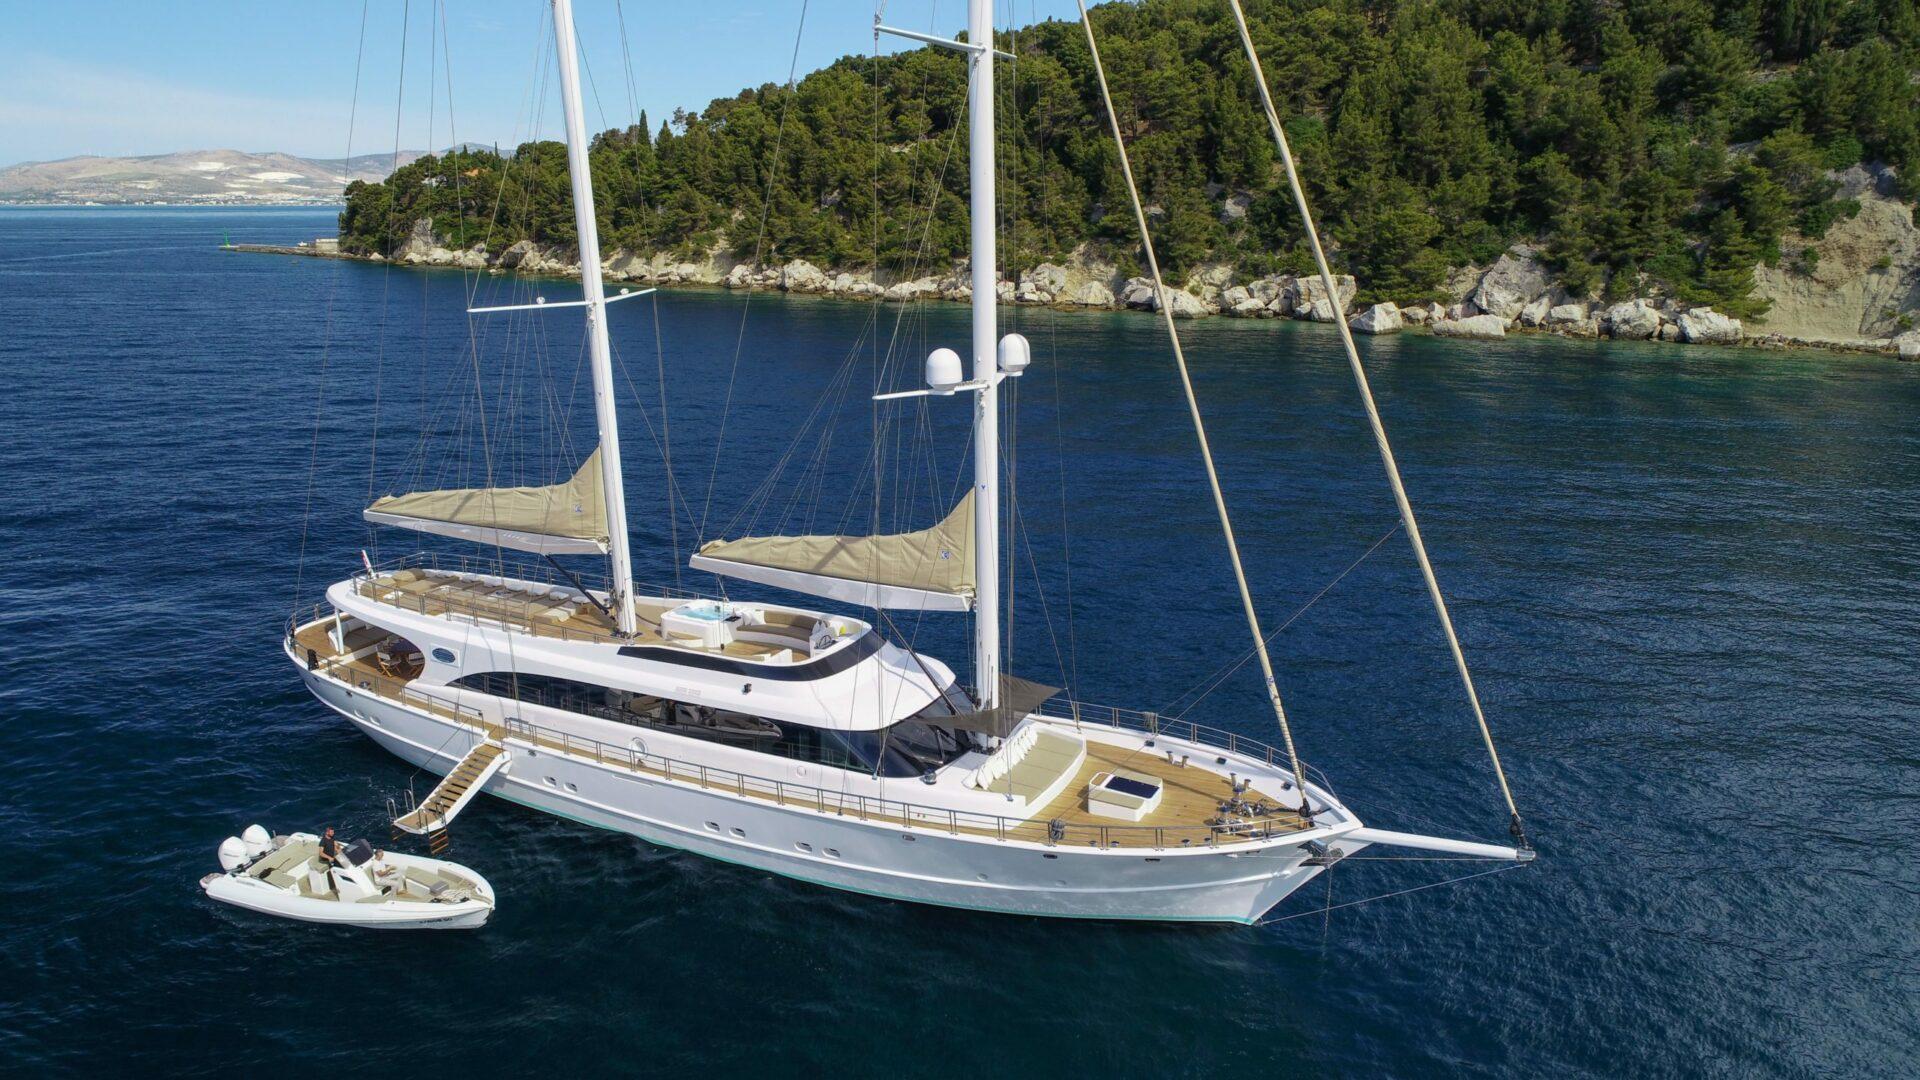 Arriving to sailing yacht Acapella